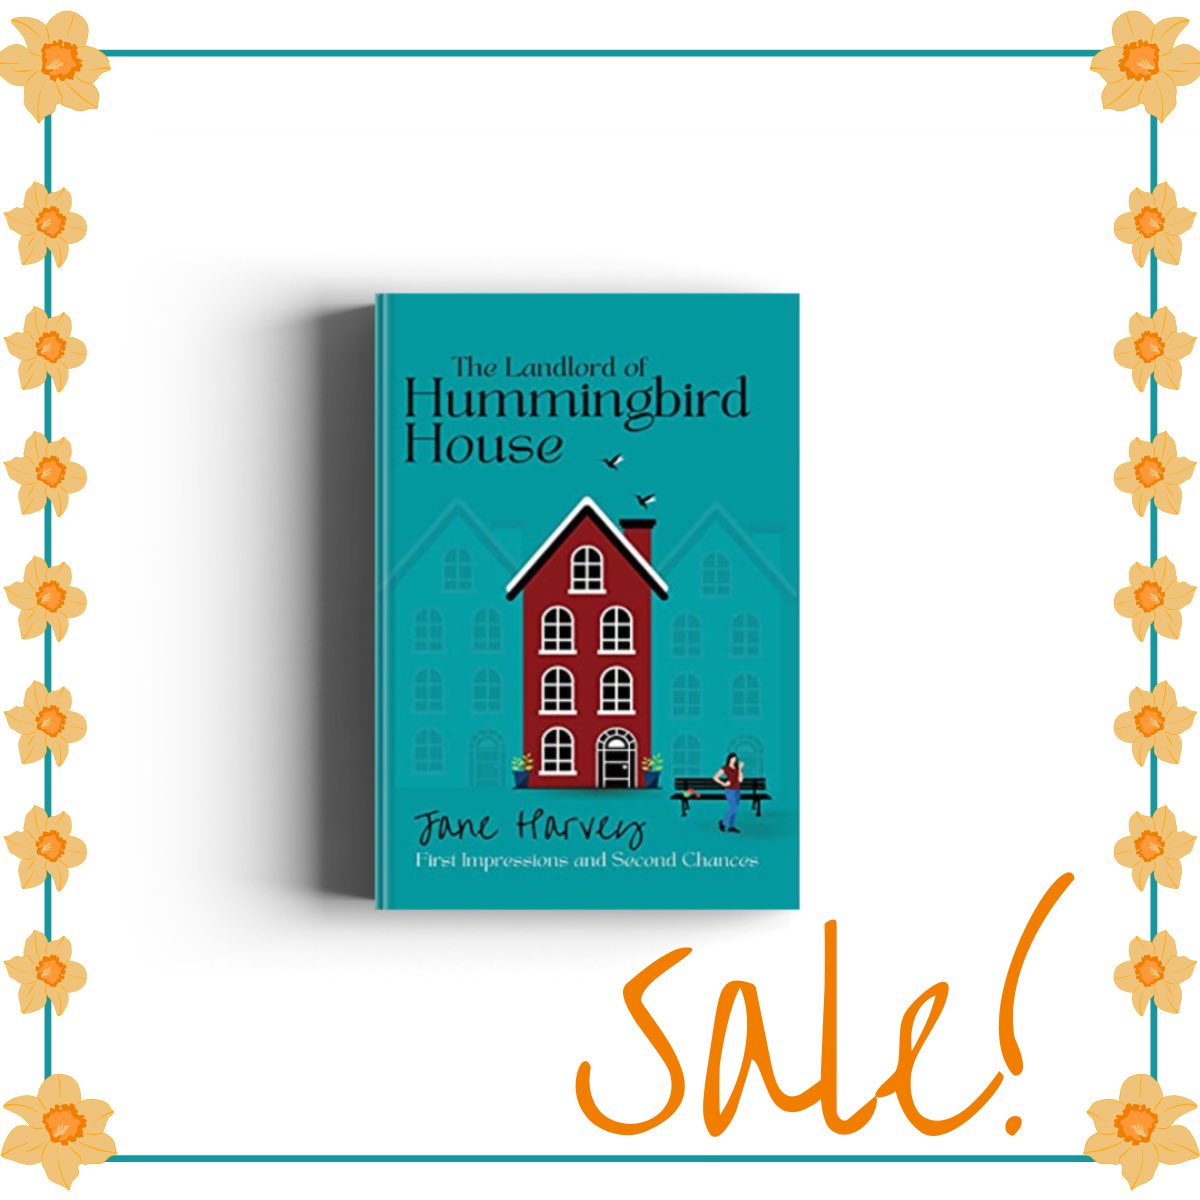 Sale! 🧡 Crack open a bargain this holiday. For two weeks only, The Landlord of Hummingbird House is just 99p. 🧡 mybook.to/LandlordHummin… #bargainbook